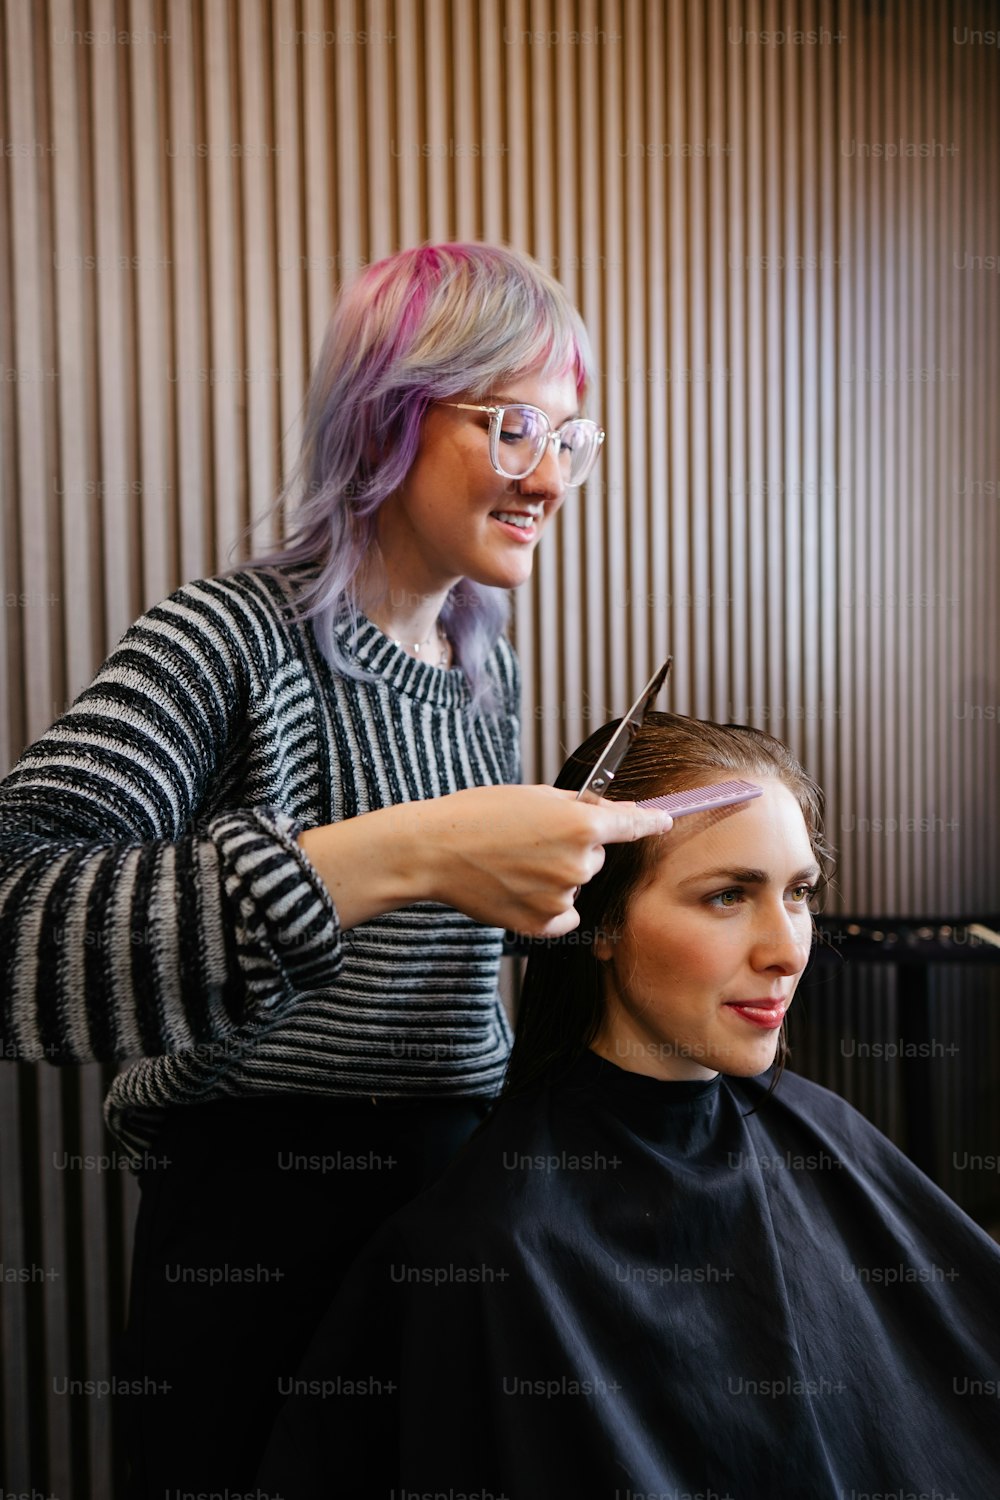 a woman cutting another woman's hair with a pair of scissors